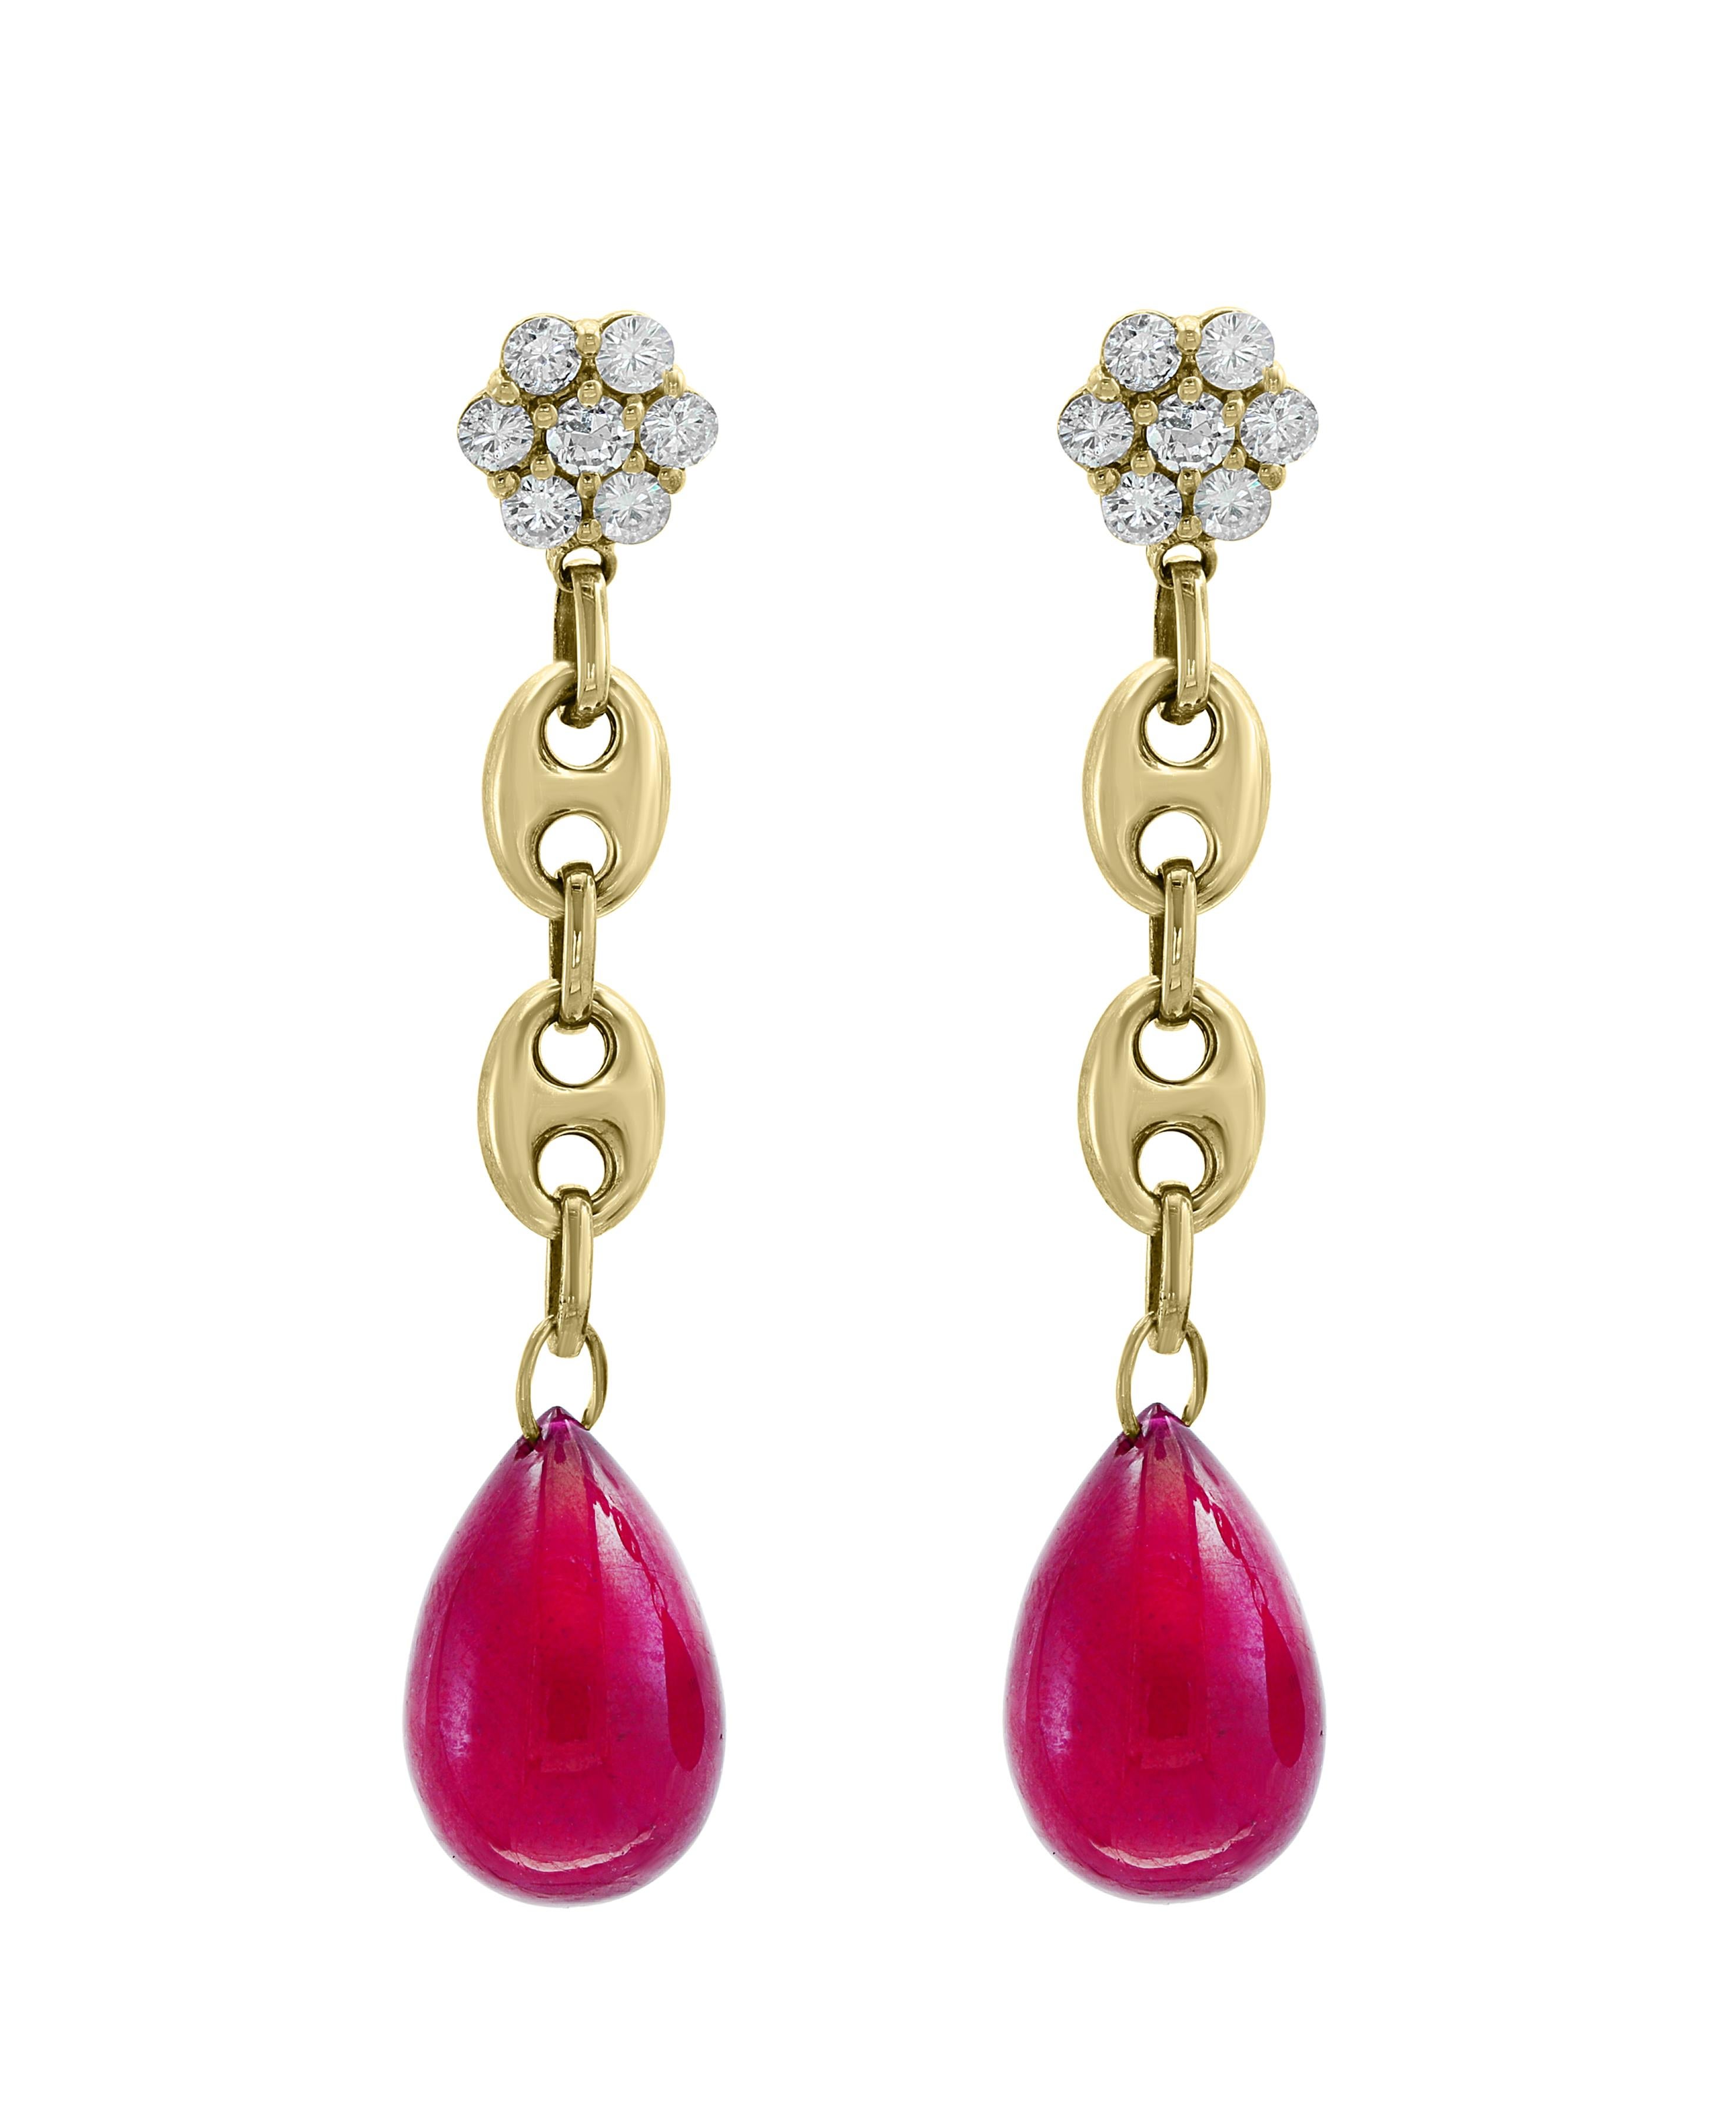 45 Carat Ruby Drop and Diamond Hanging/Chandelier Earrings 14 Karat Yellow Gold For Sale 3